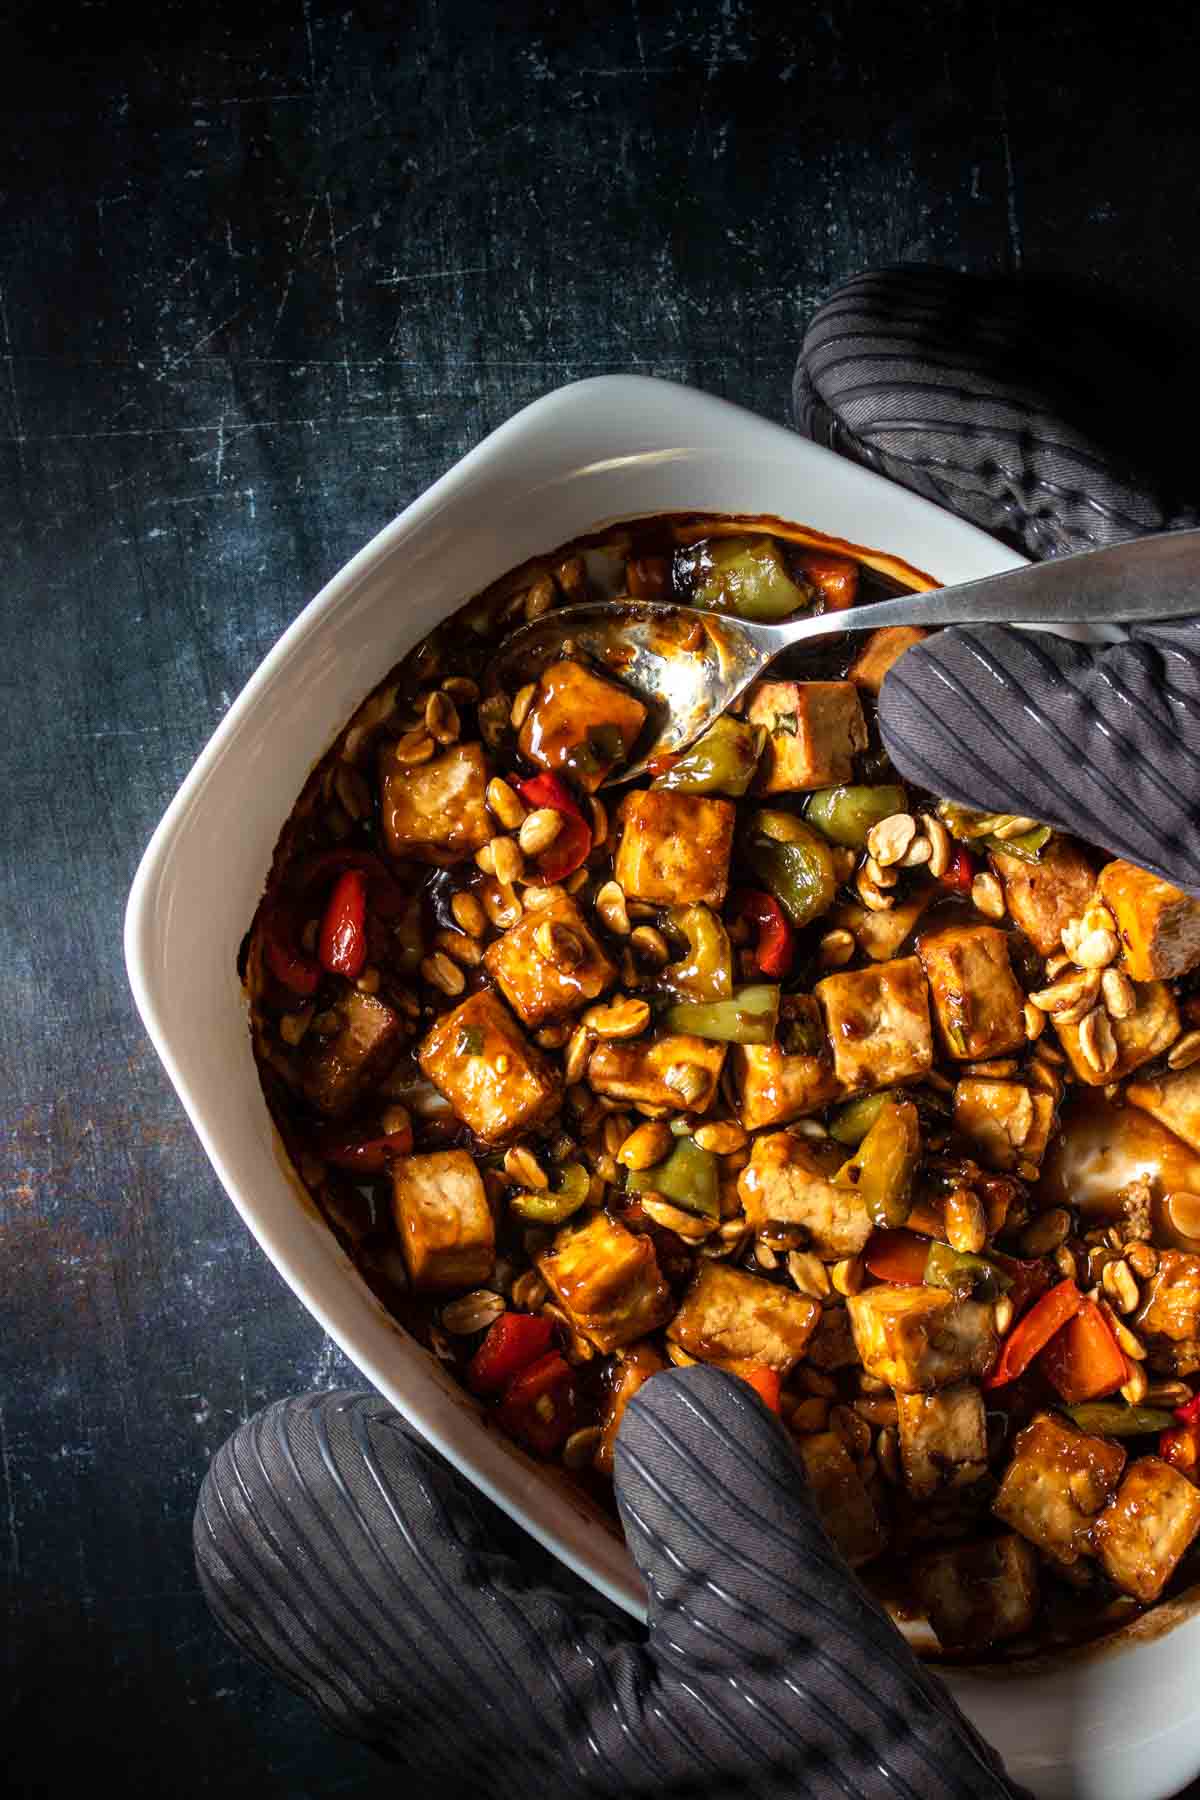 A Kung Pao tofu dish with red and green bell peppers mixed with peanuts baked in a white dish and held by grey oven mitts.